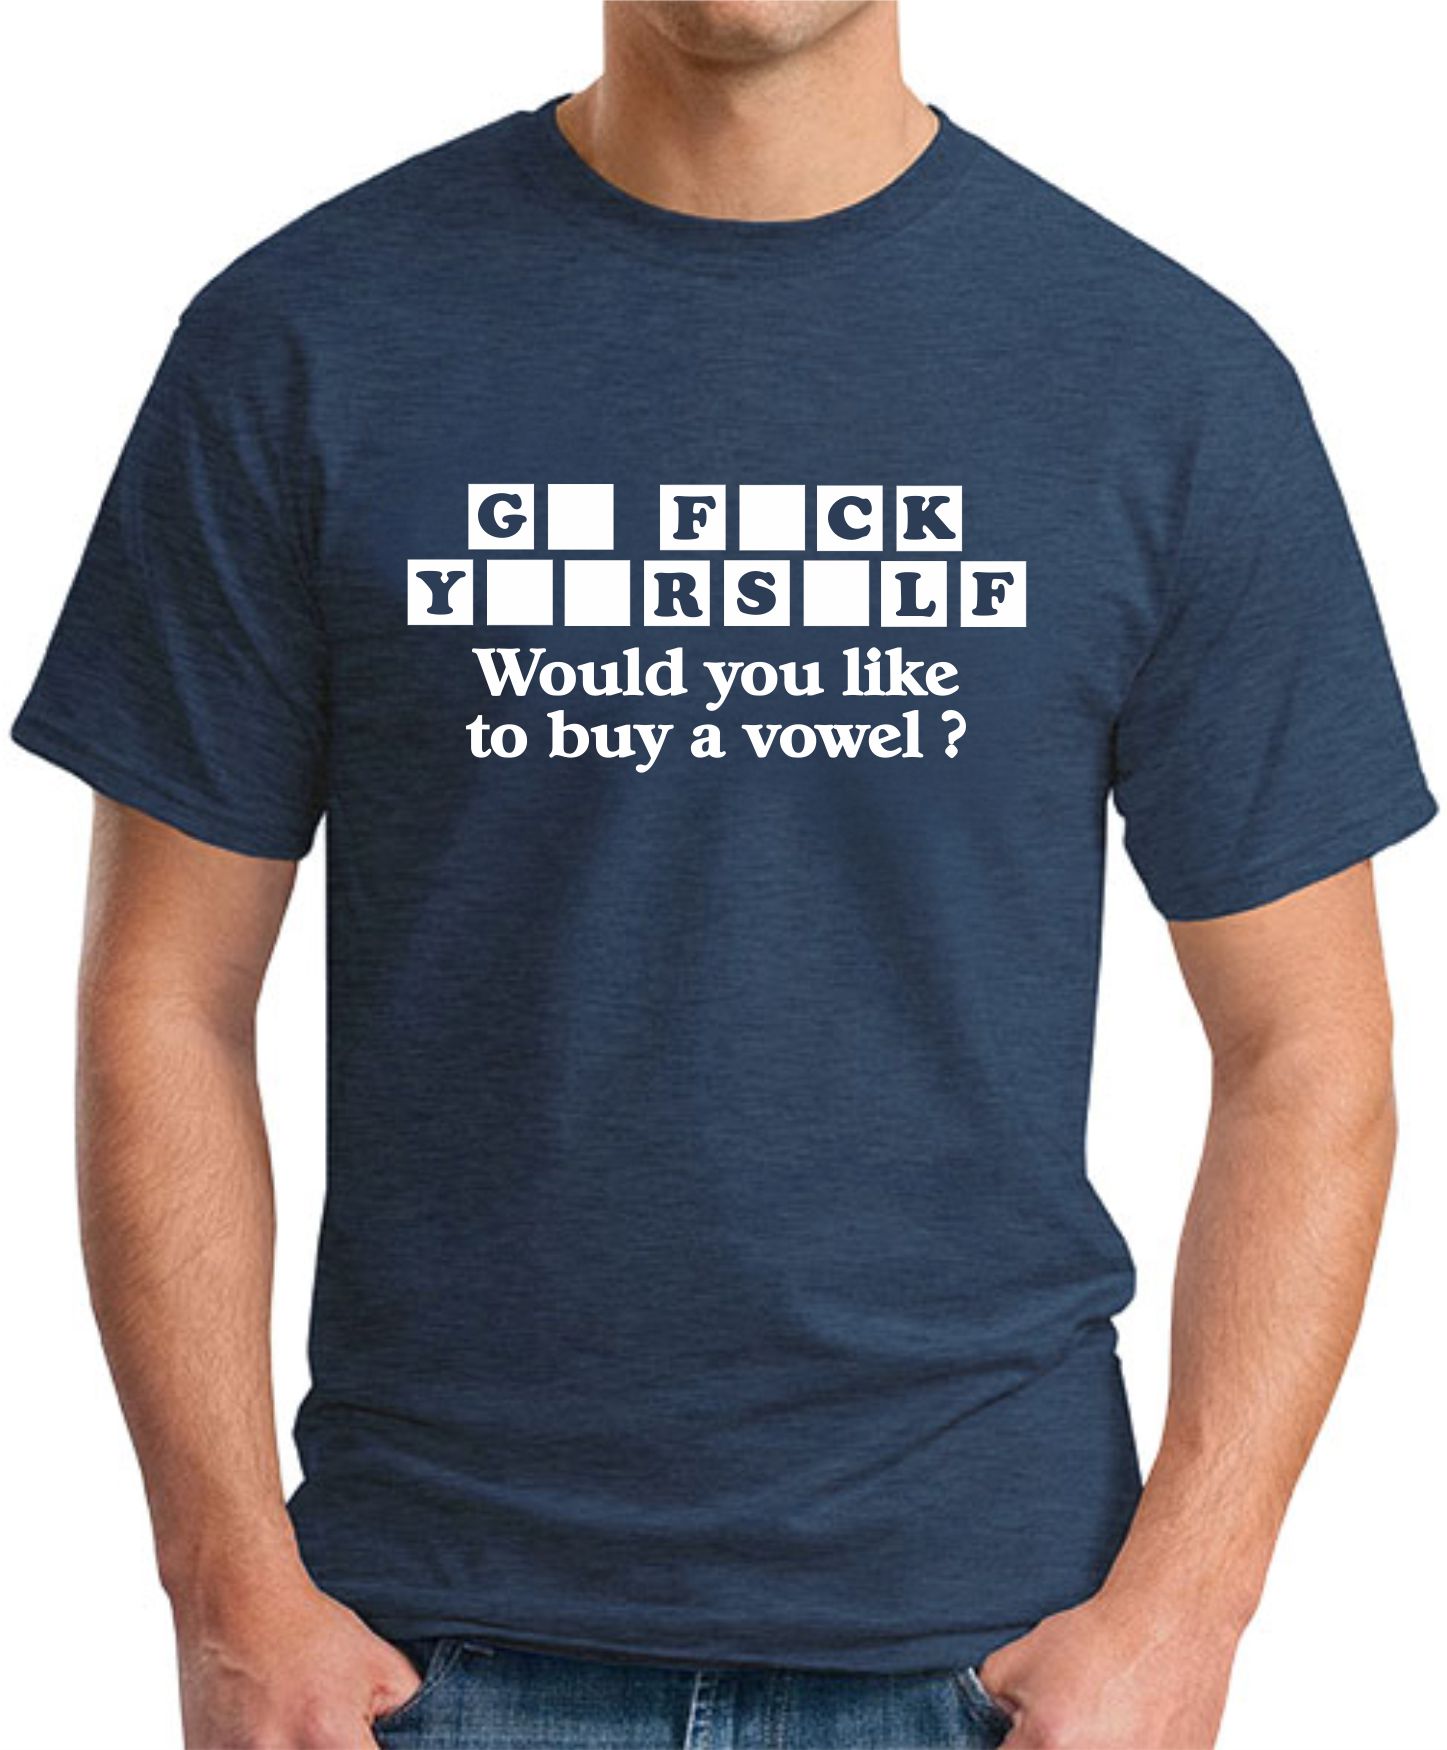 WOULD YOU LIKE TO BUY A VOWEL? T-SHIRT - GeekyTees